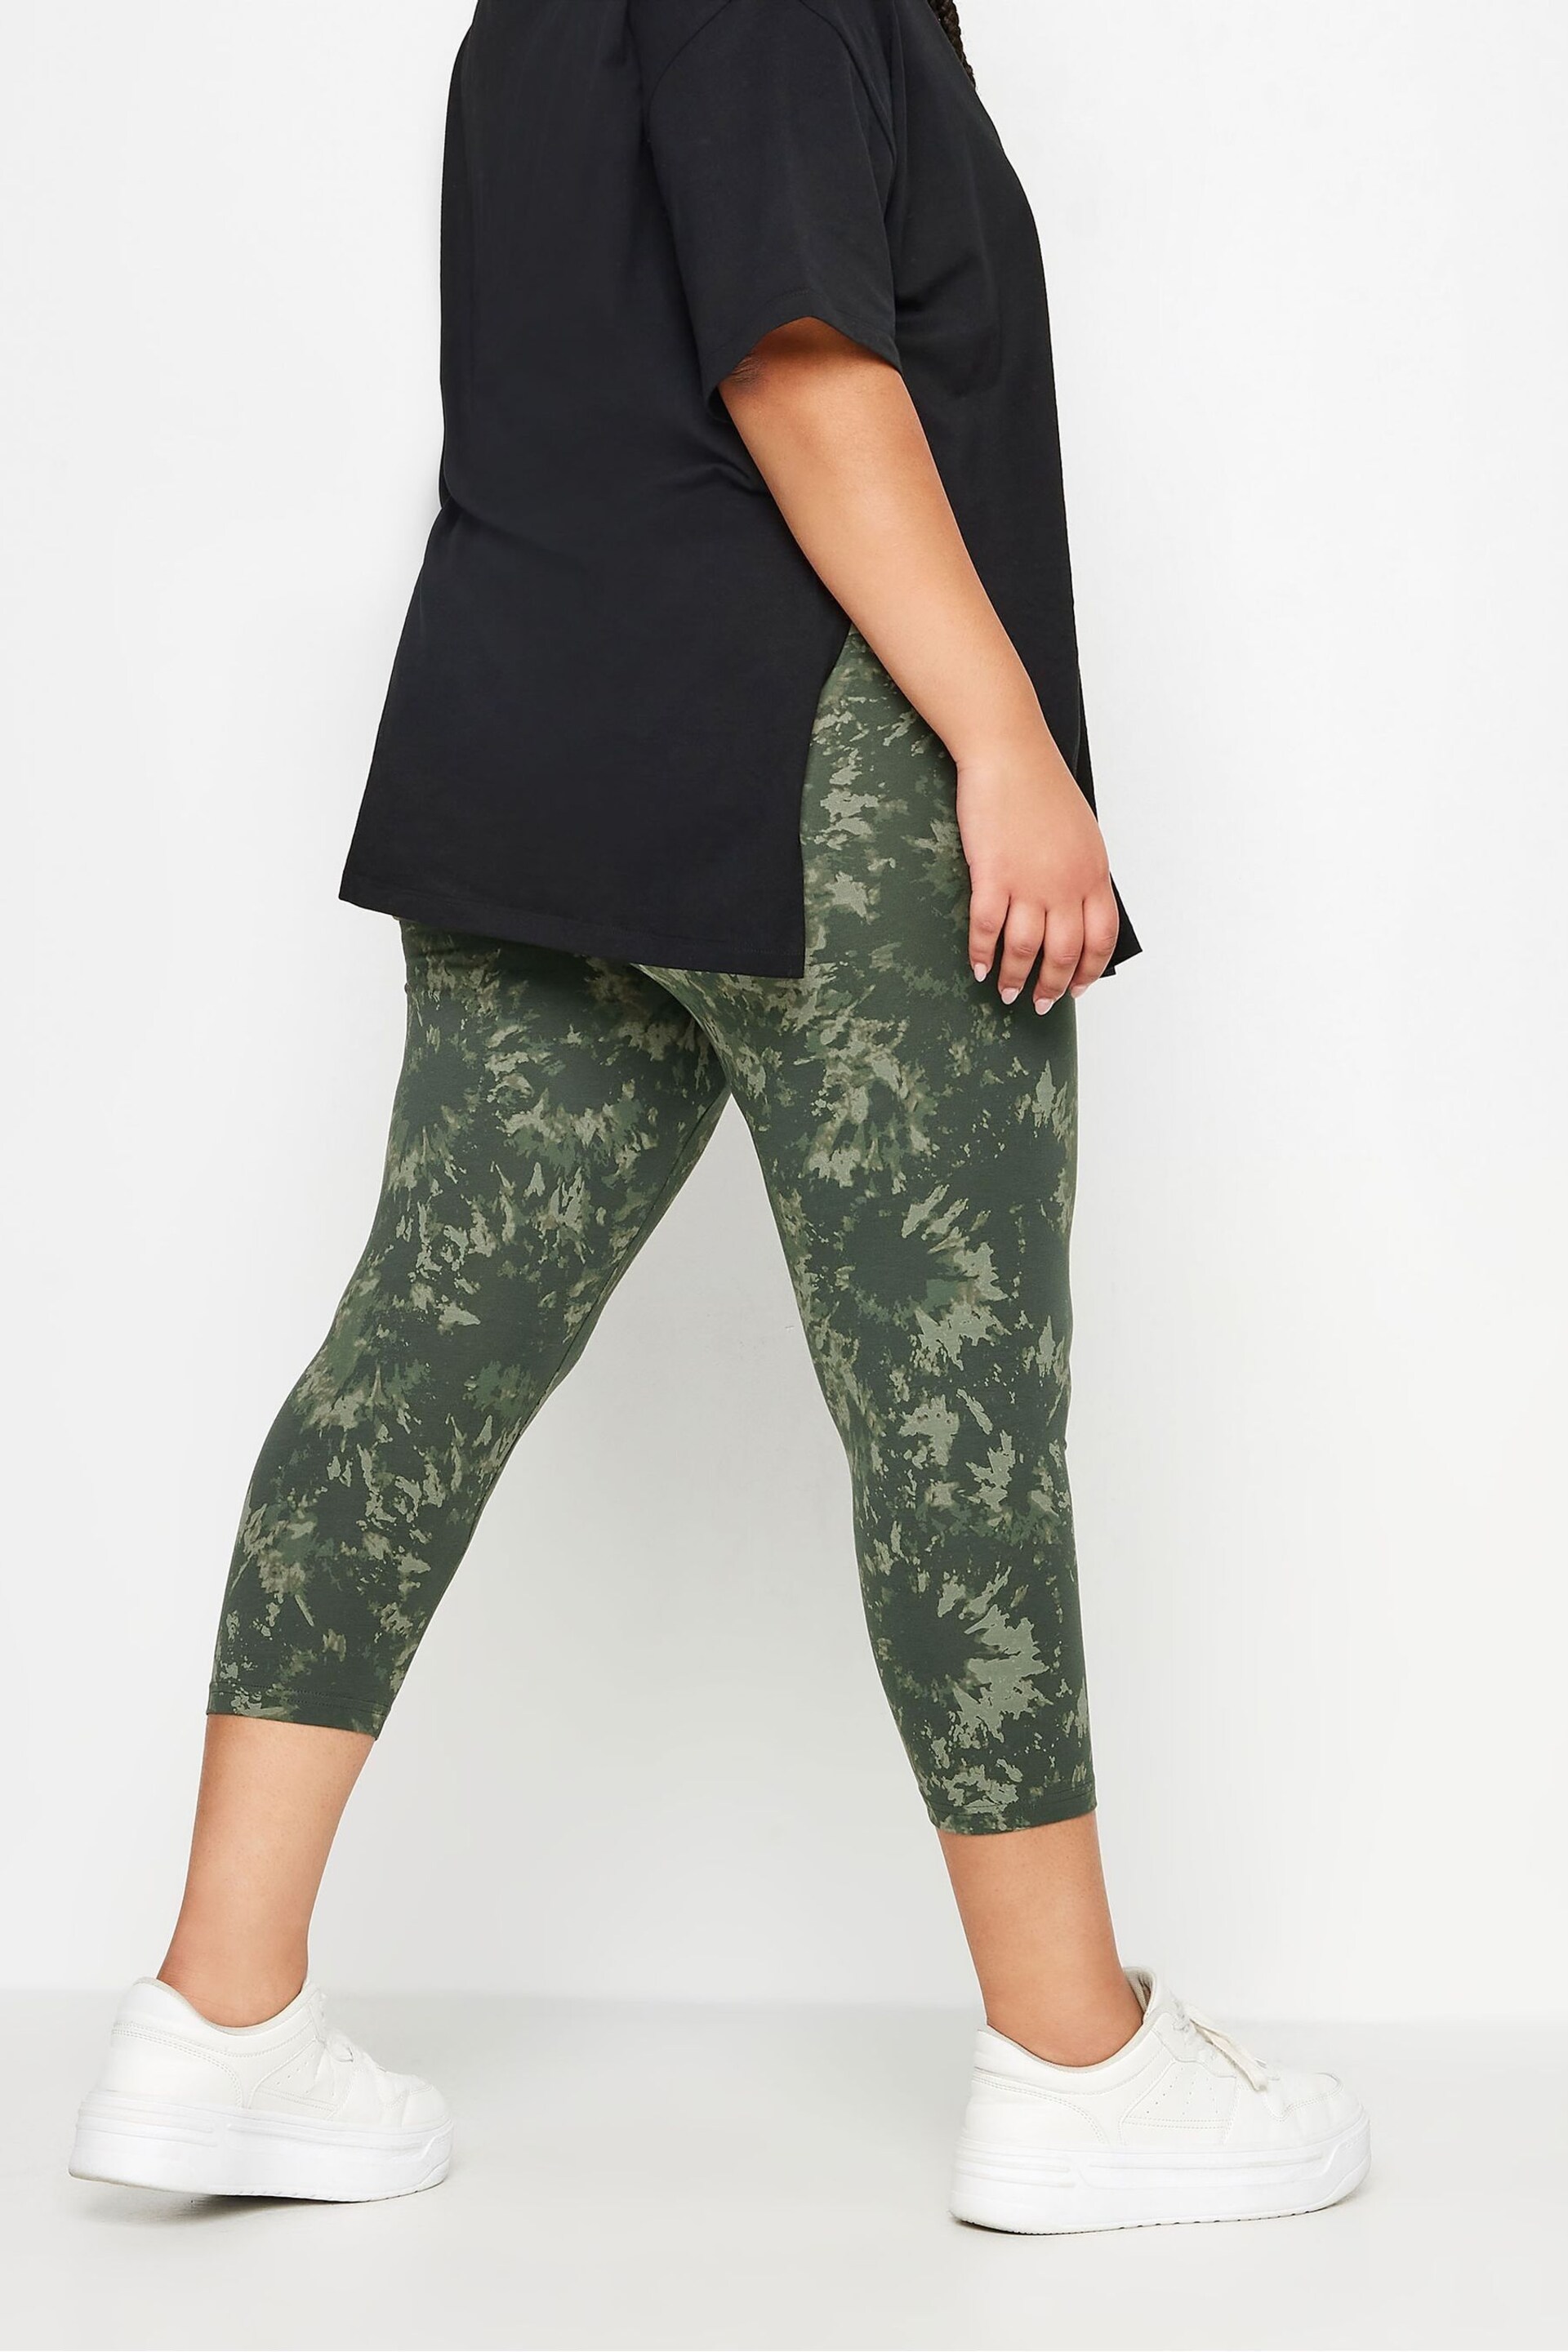 Yours Curve Green 2 PACK Black & White Ditsy Floral Print Cropped Leggings - Image 4 of 4